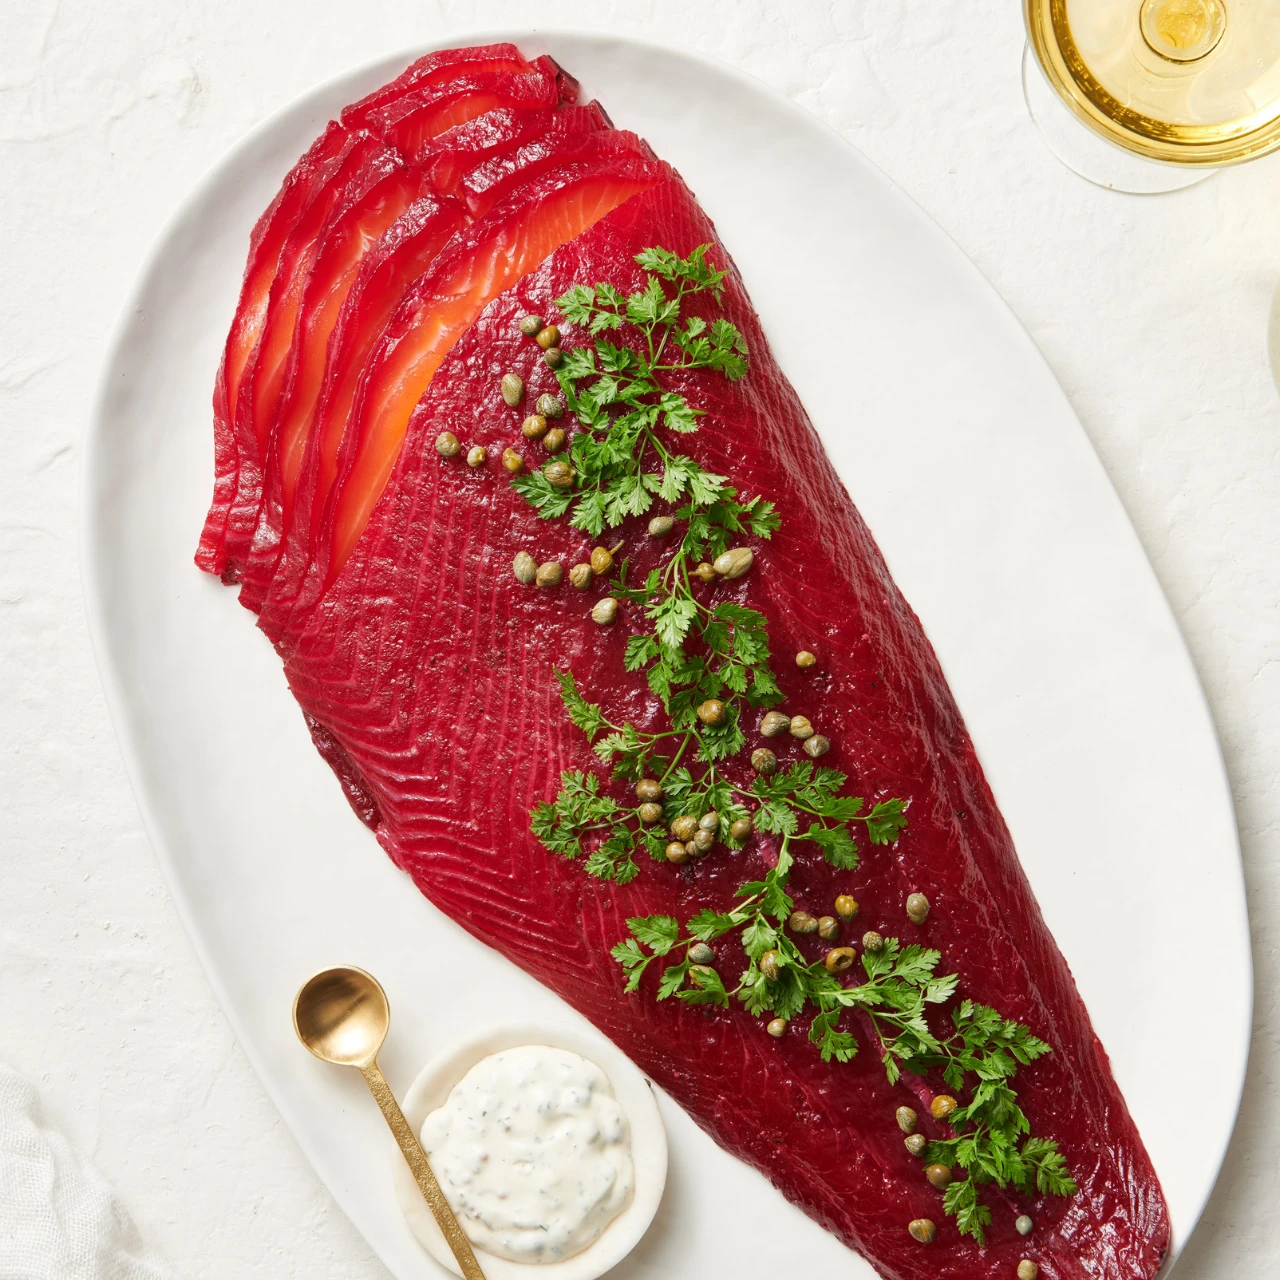 Homemade beetroot cure king NZ salmon with a zesty mayonnaise recipe. The best way to have a side of salmon.